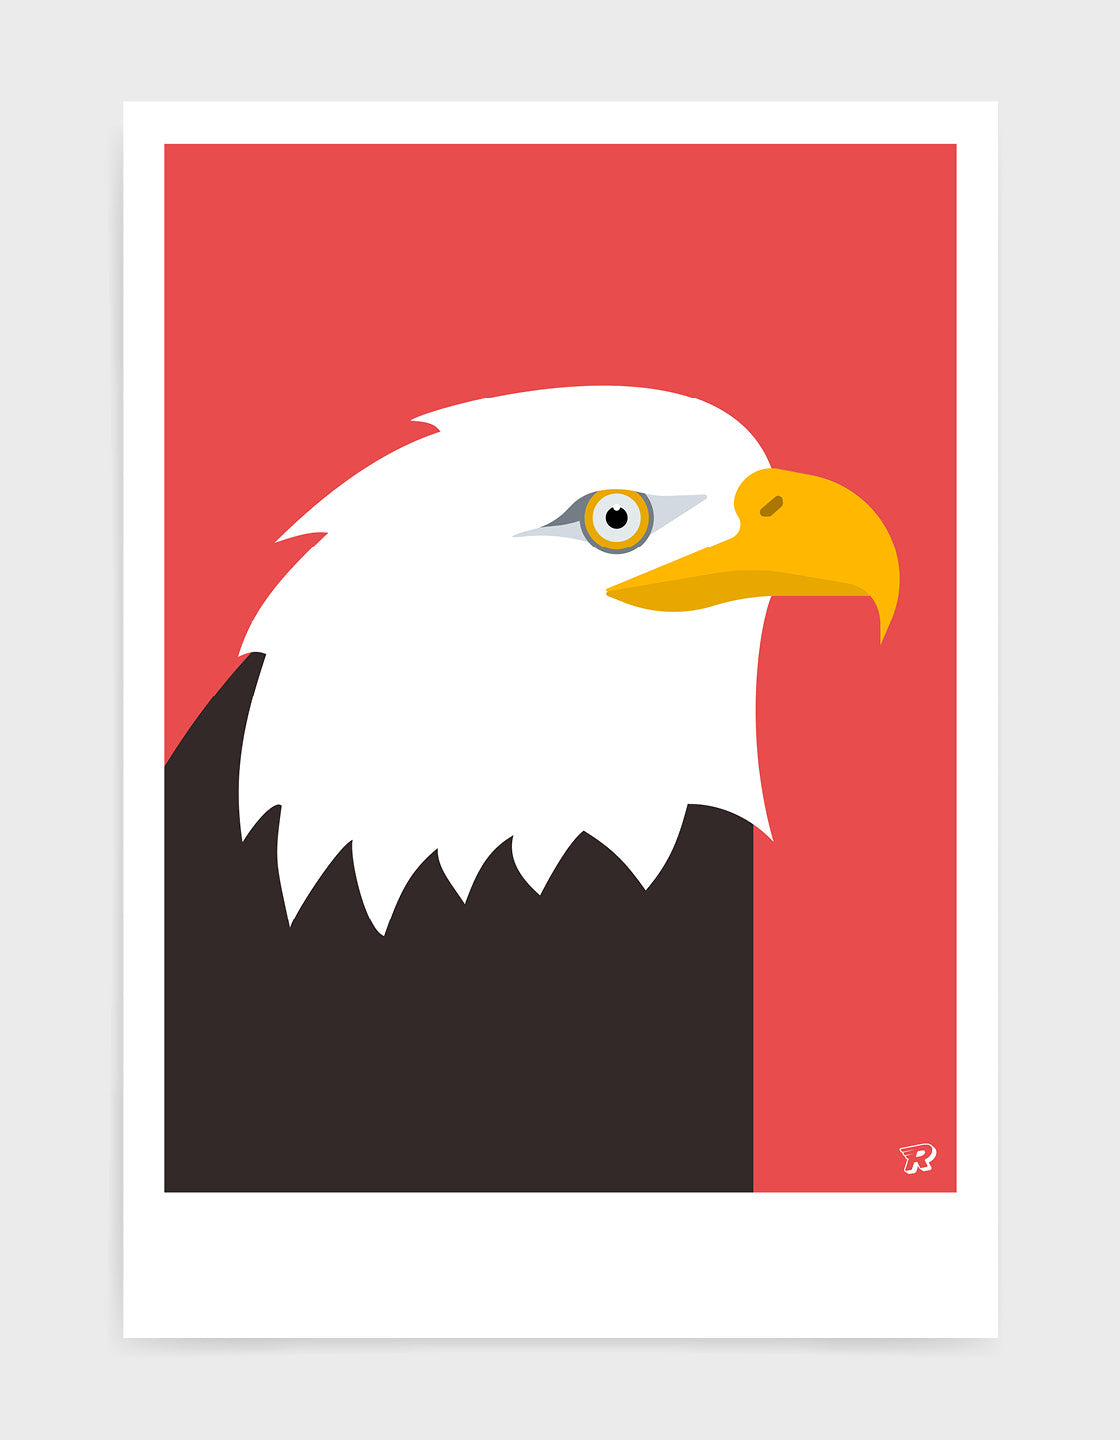 art print of an American bald eagle in profile against a red background